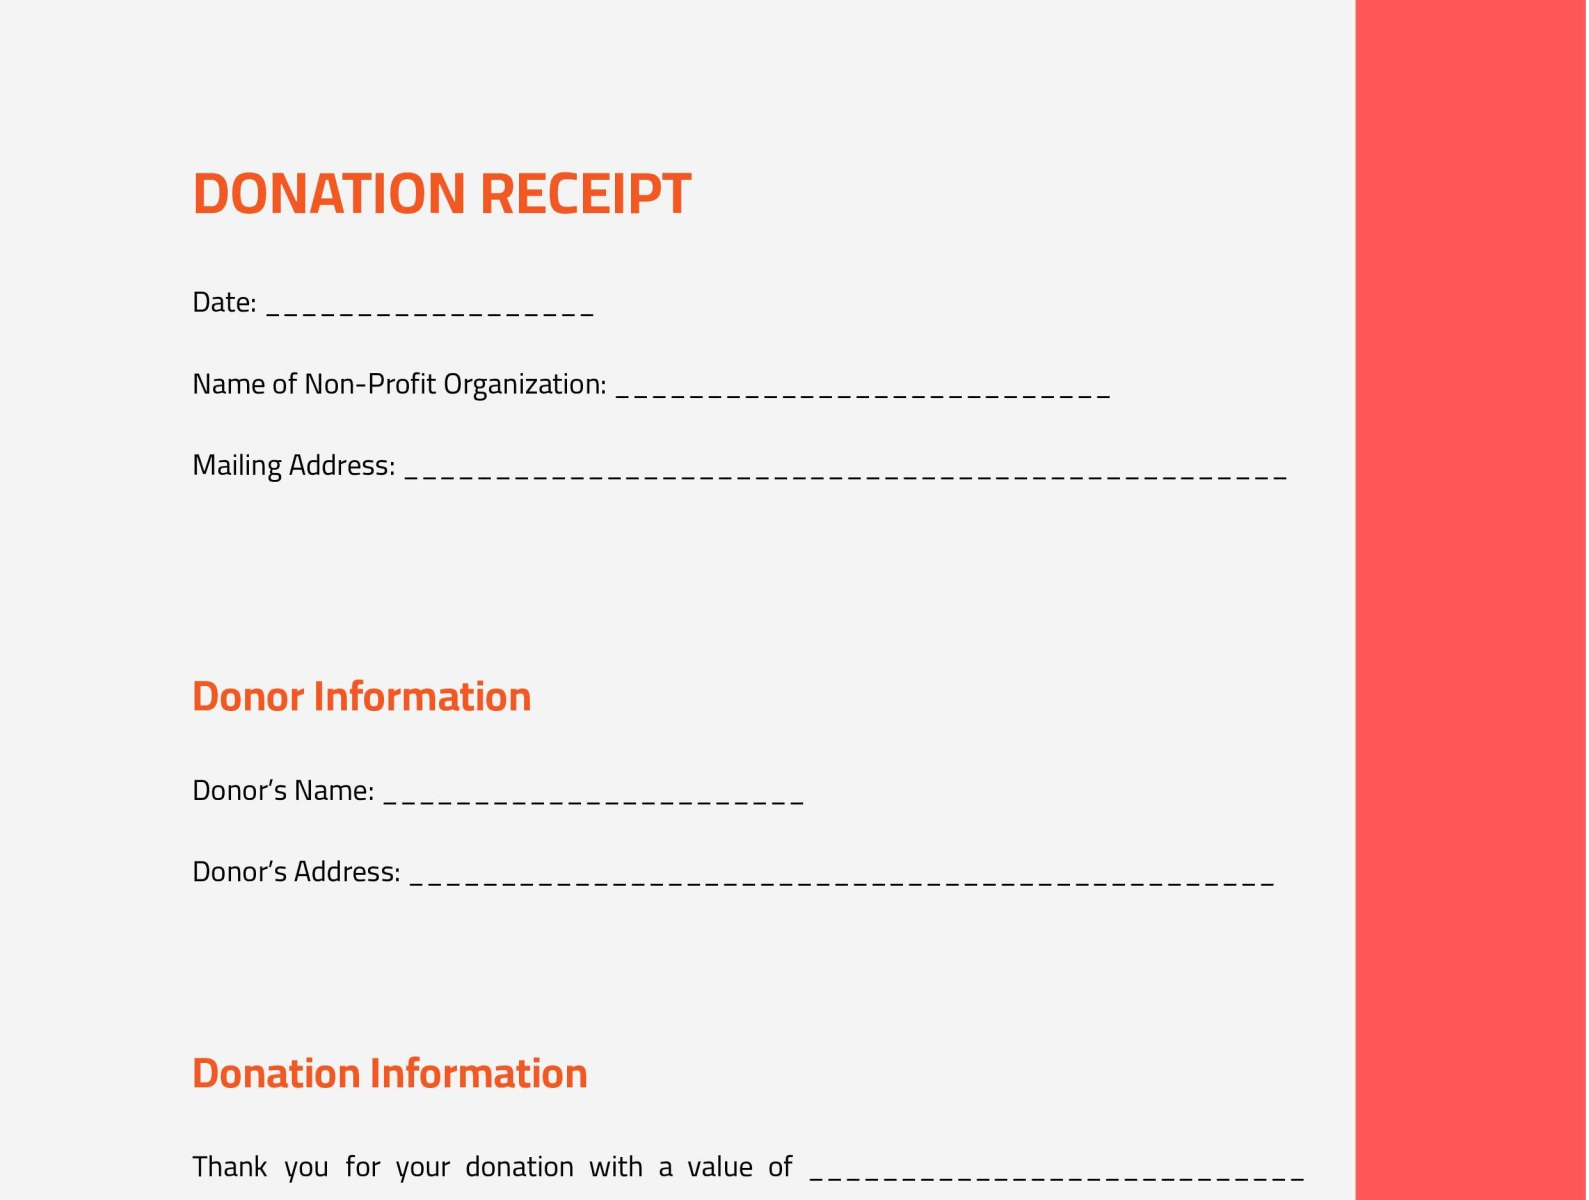 donation-receipt-template-by-free-google-docs-google-slide-templates-on-dribbble